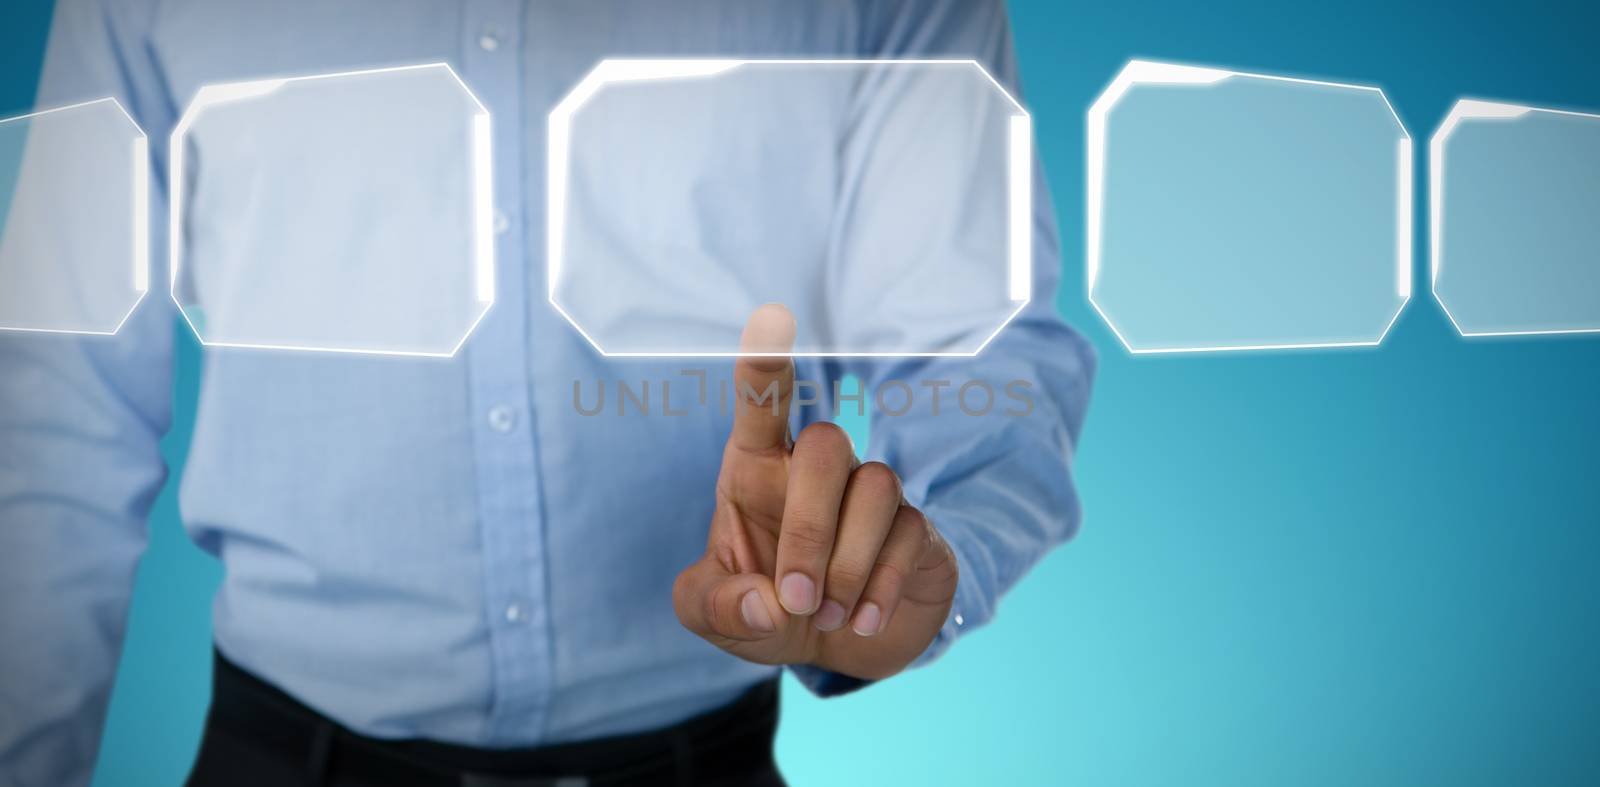 Mid section of businessman touching invisible screen against abstract blue background